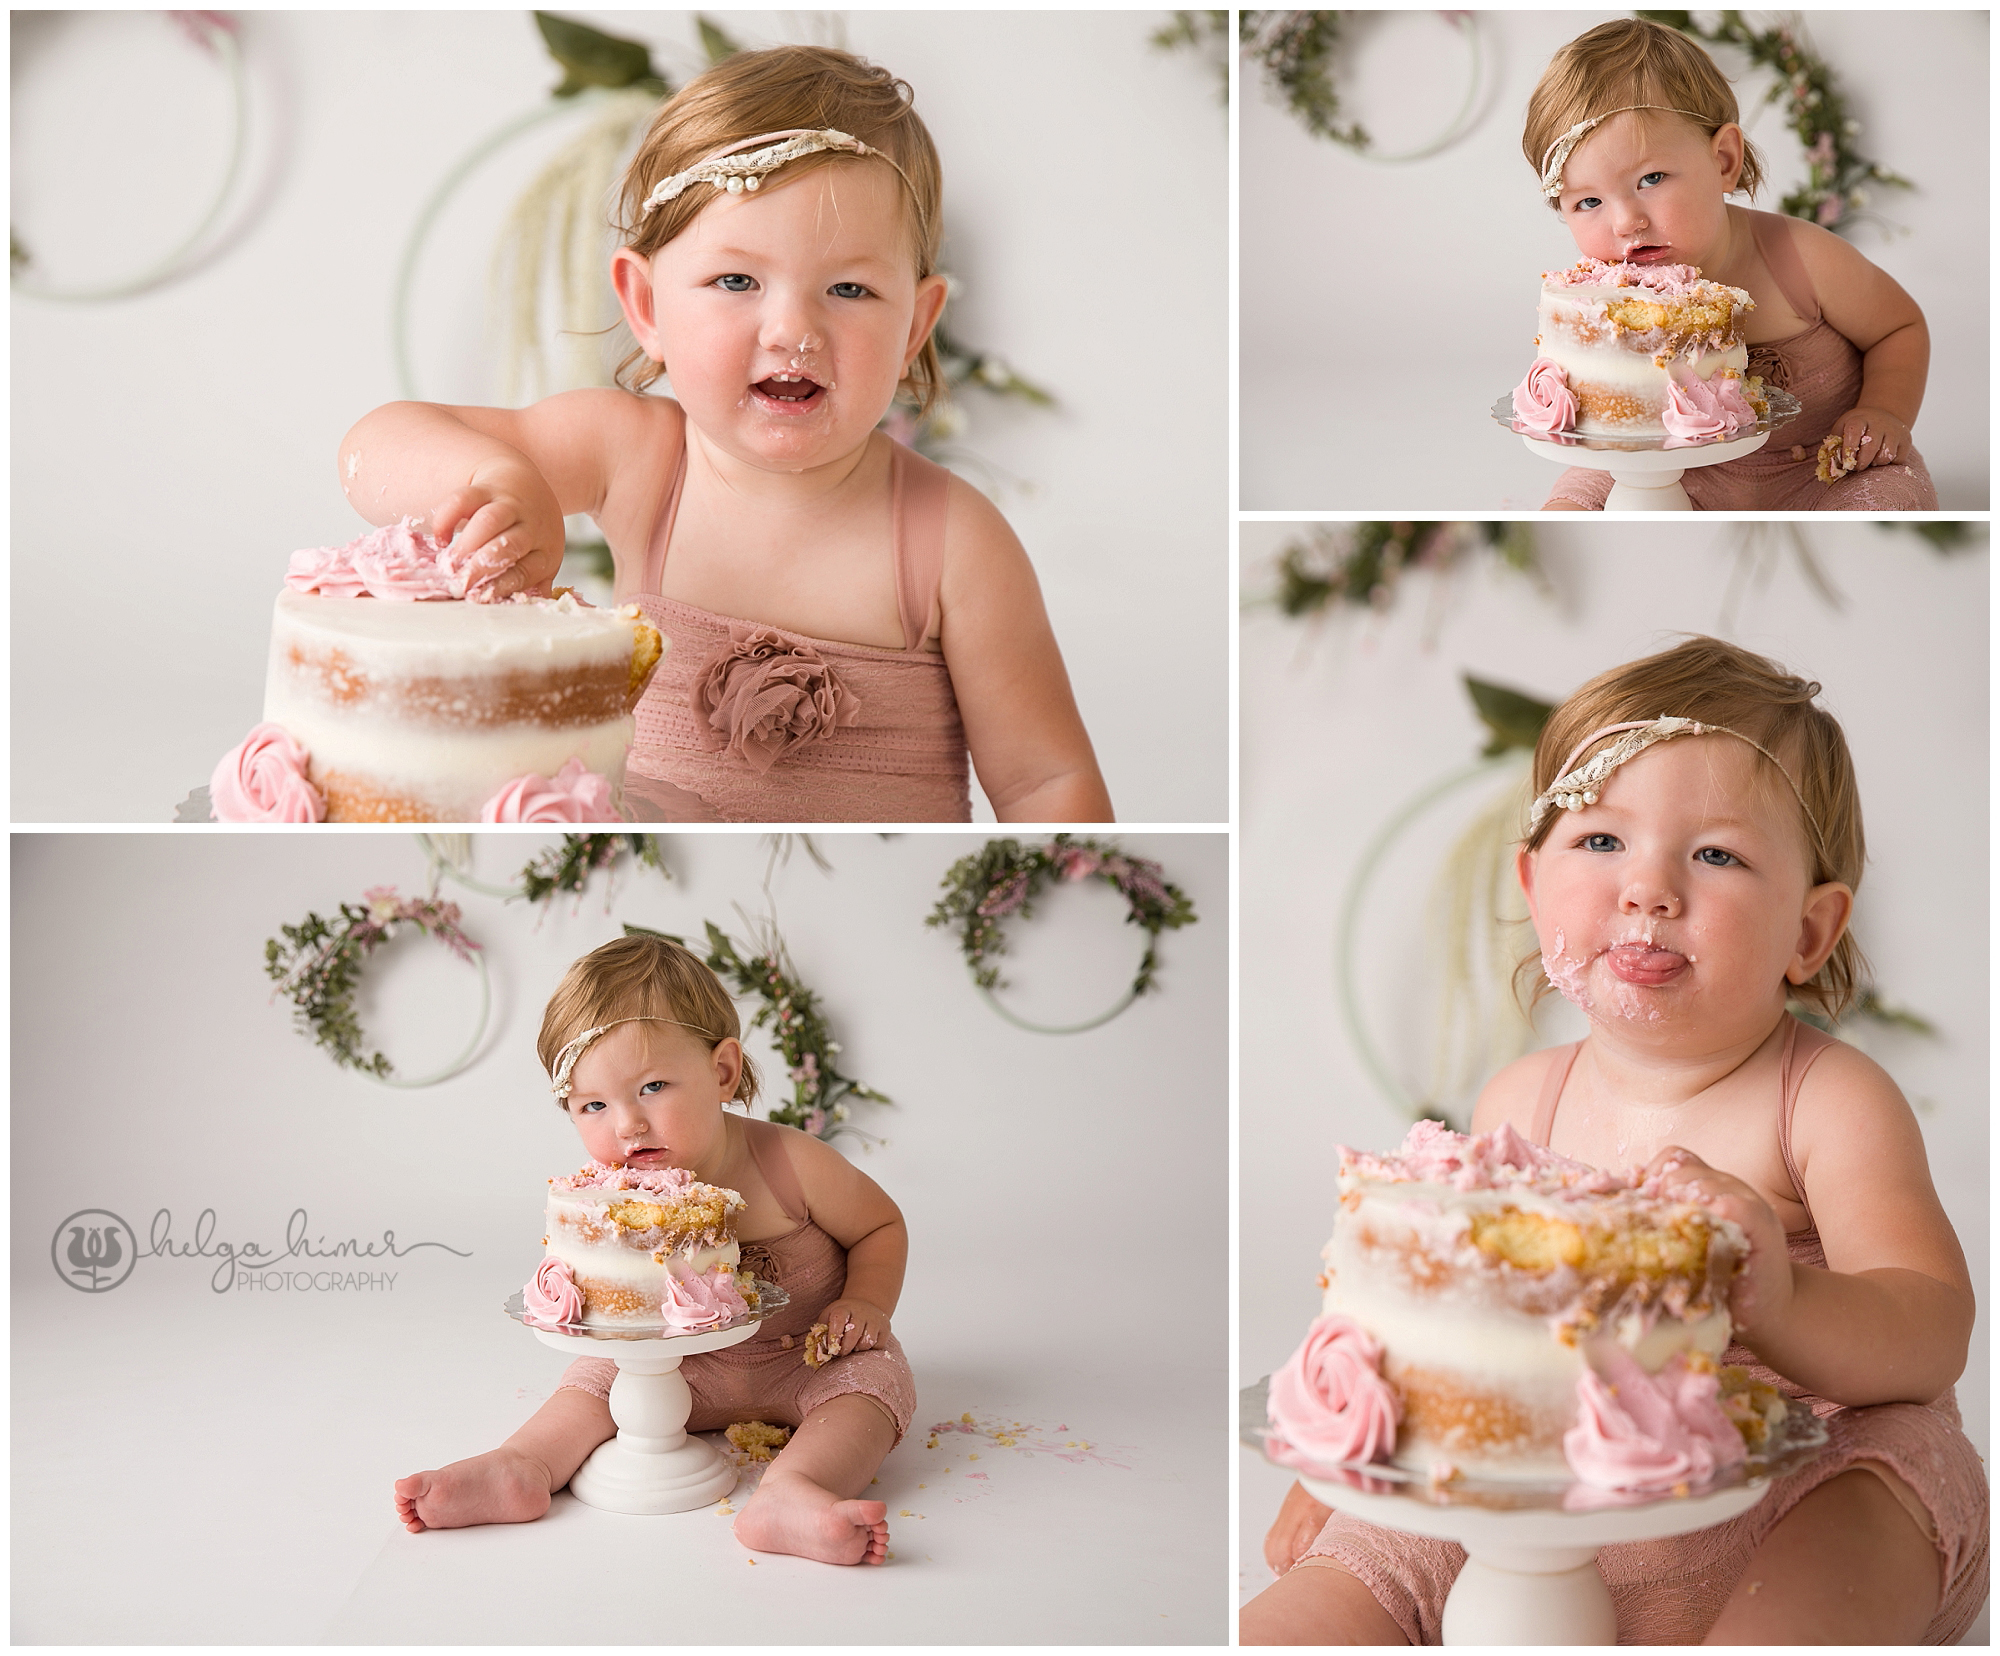 boho syled cakesmash session with a girl in a pink outfit and naked cake